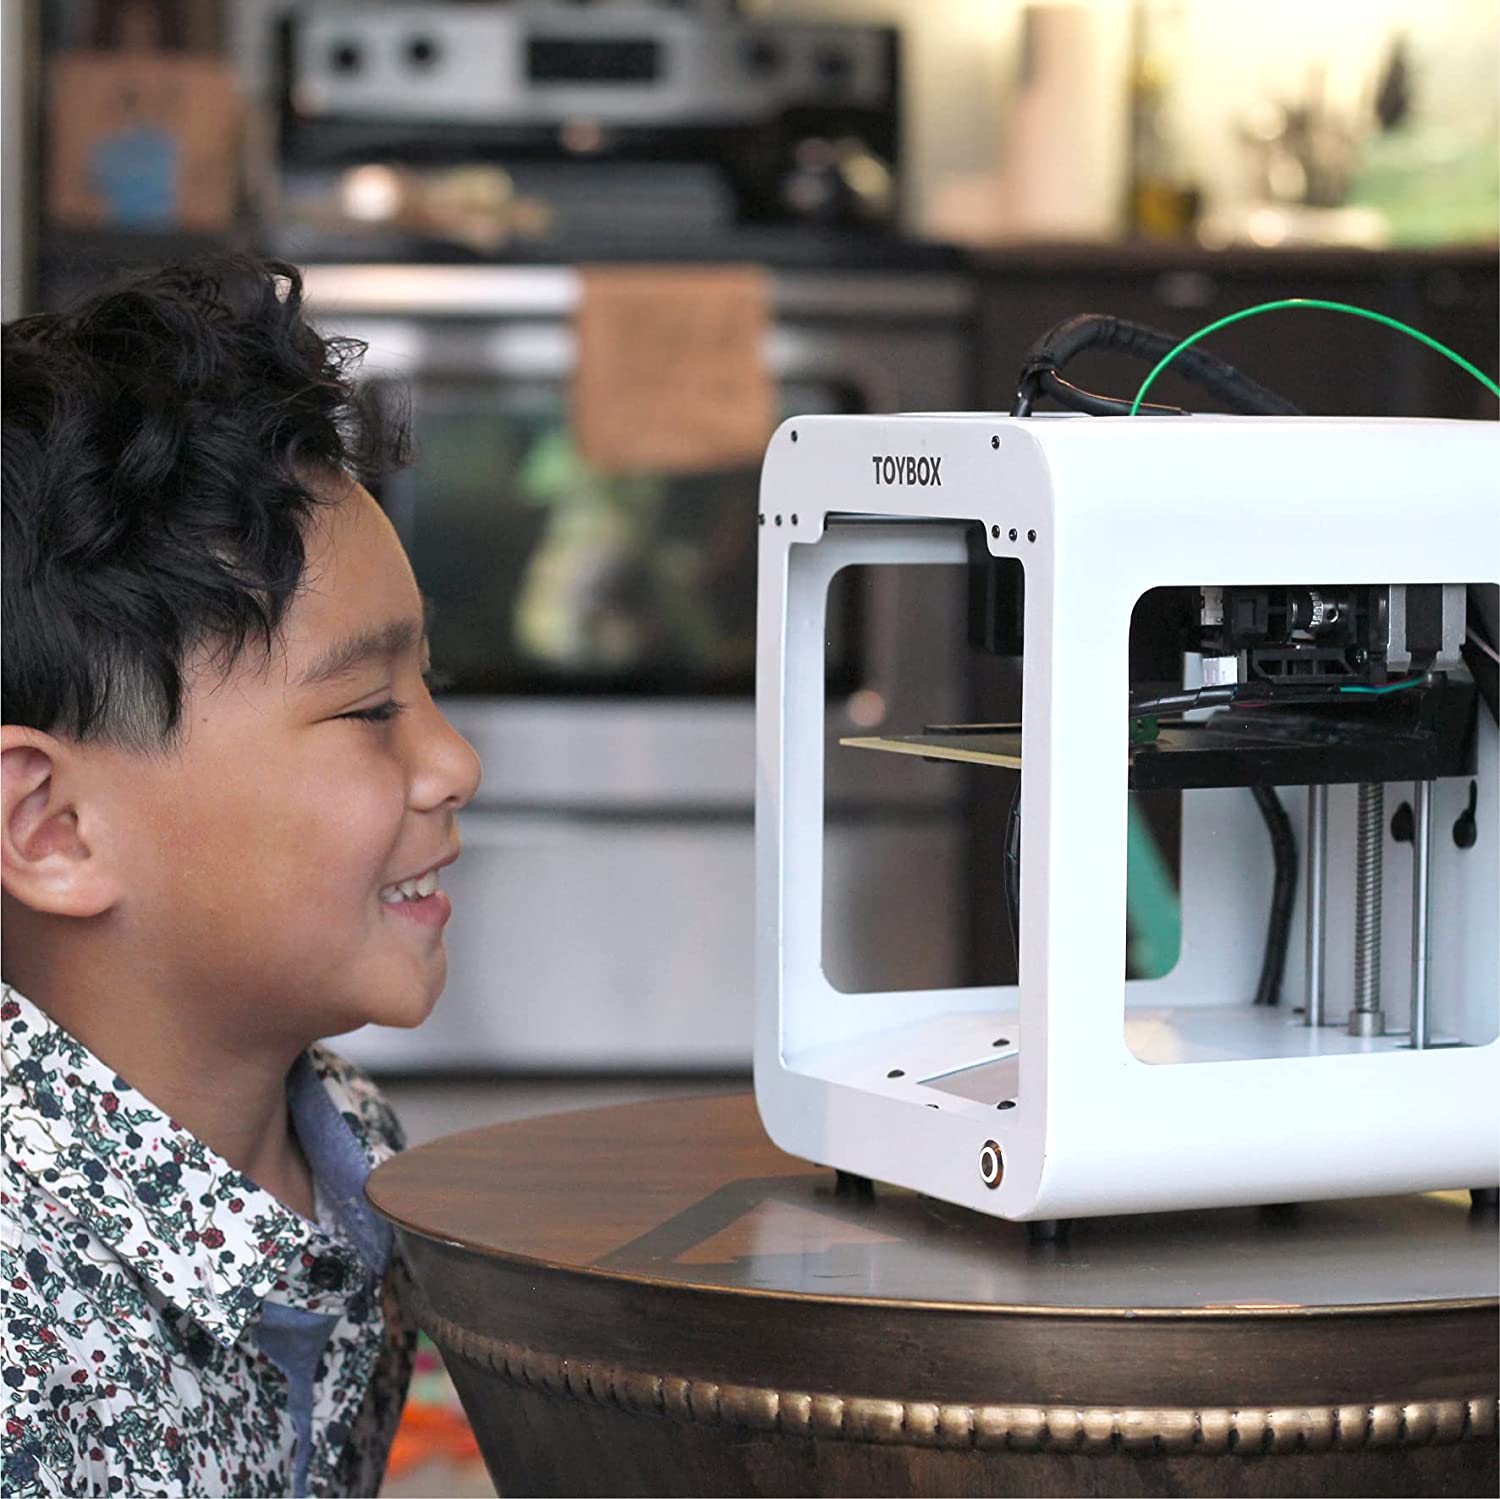 Toybox 3D Printer Review